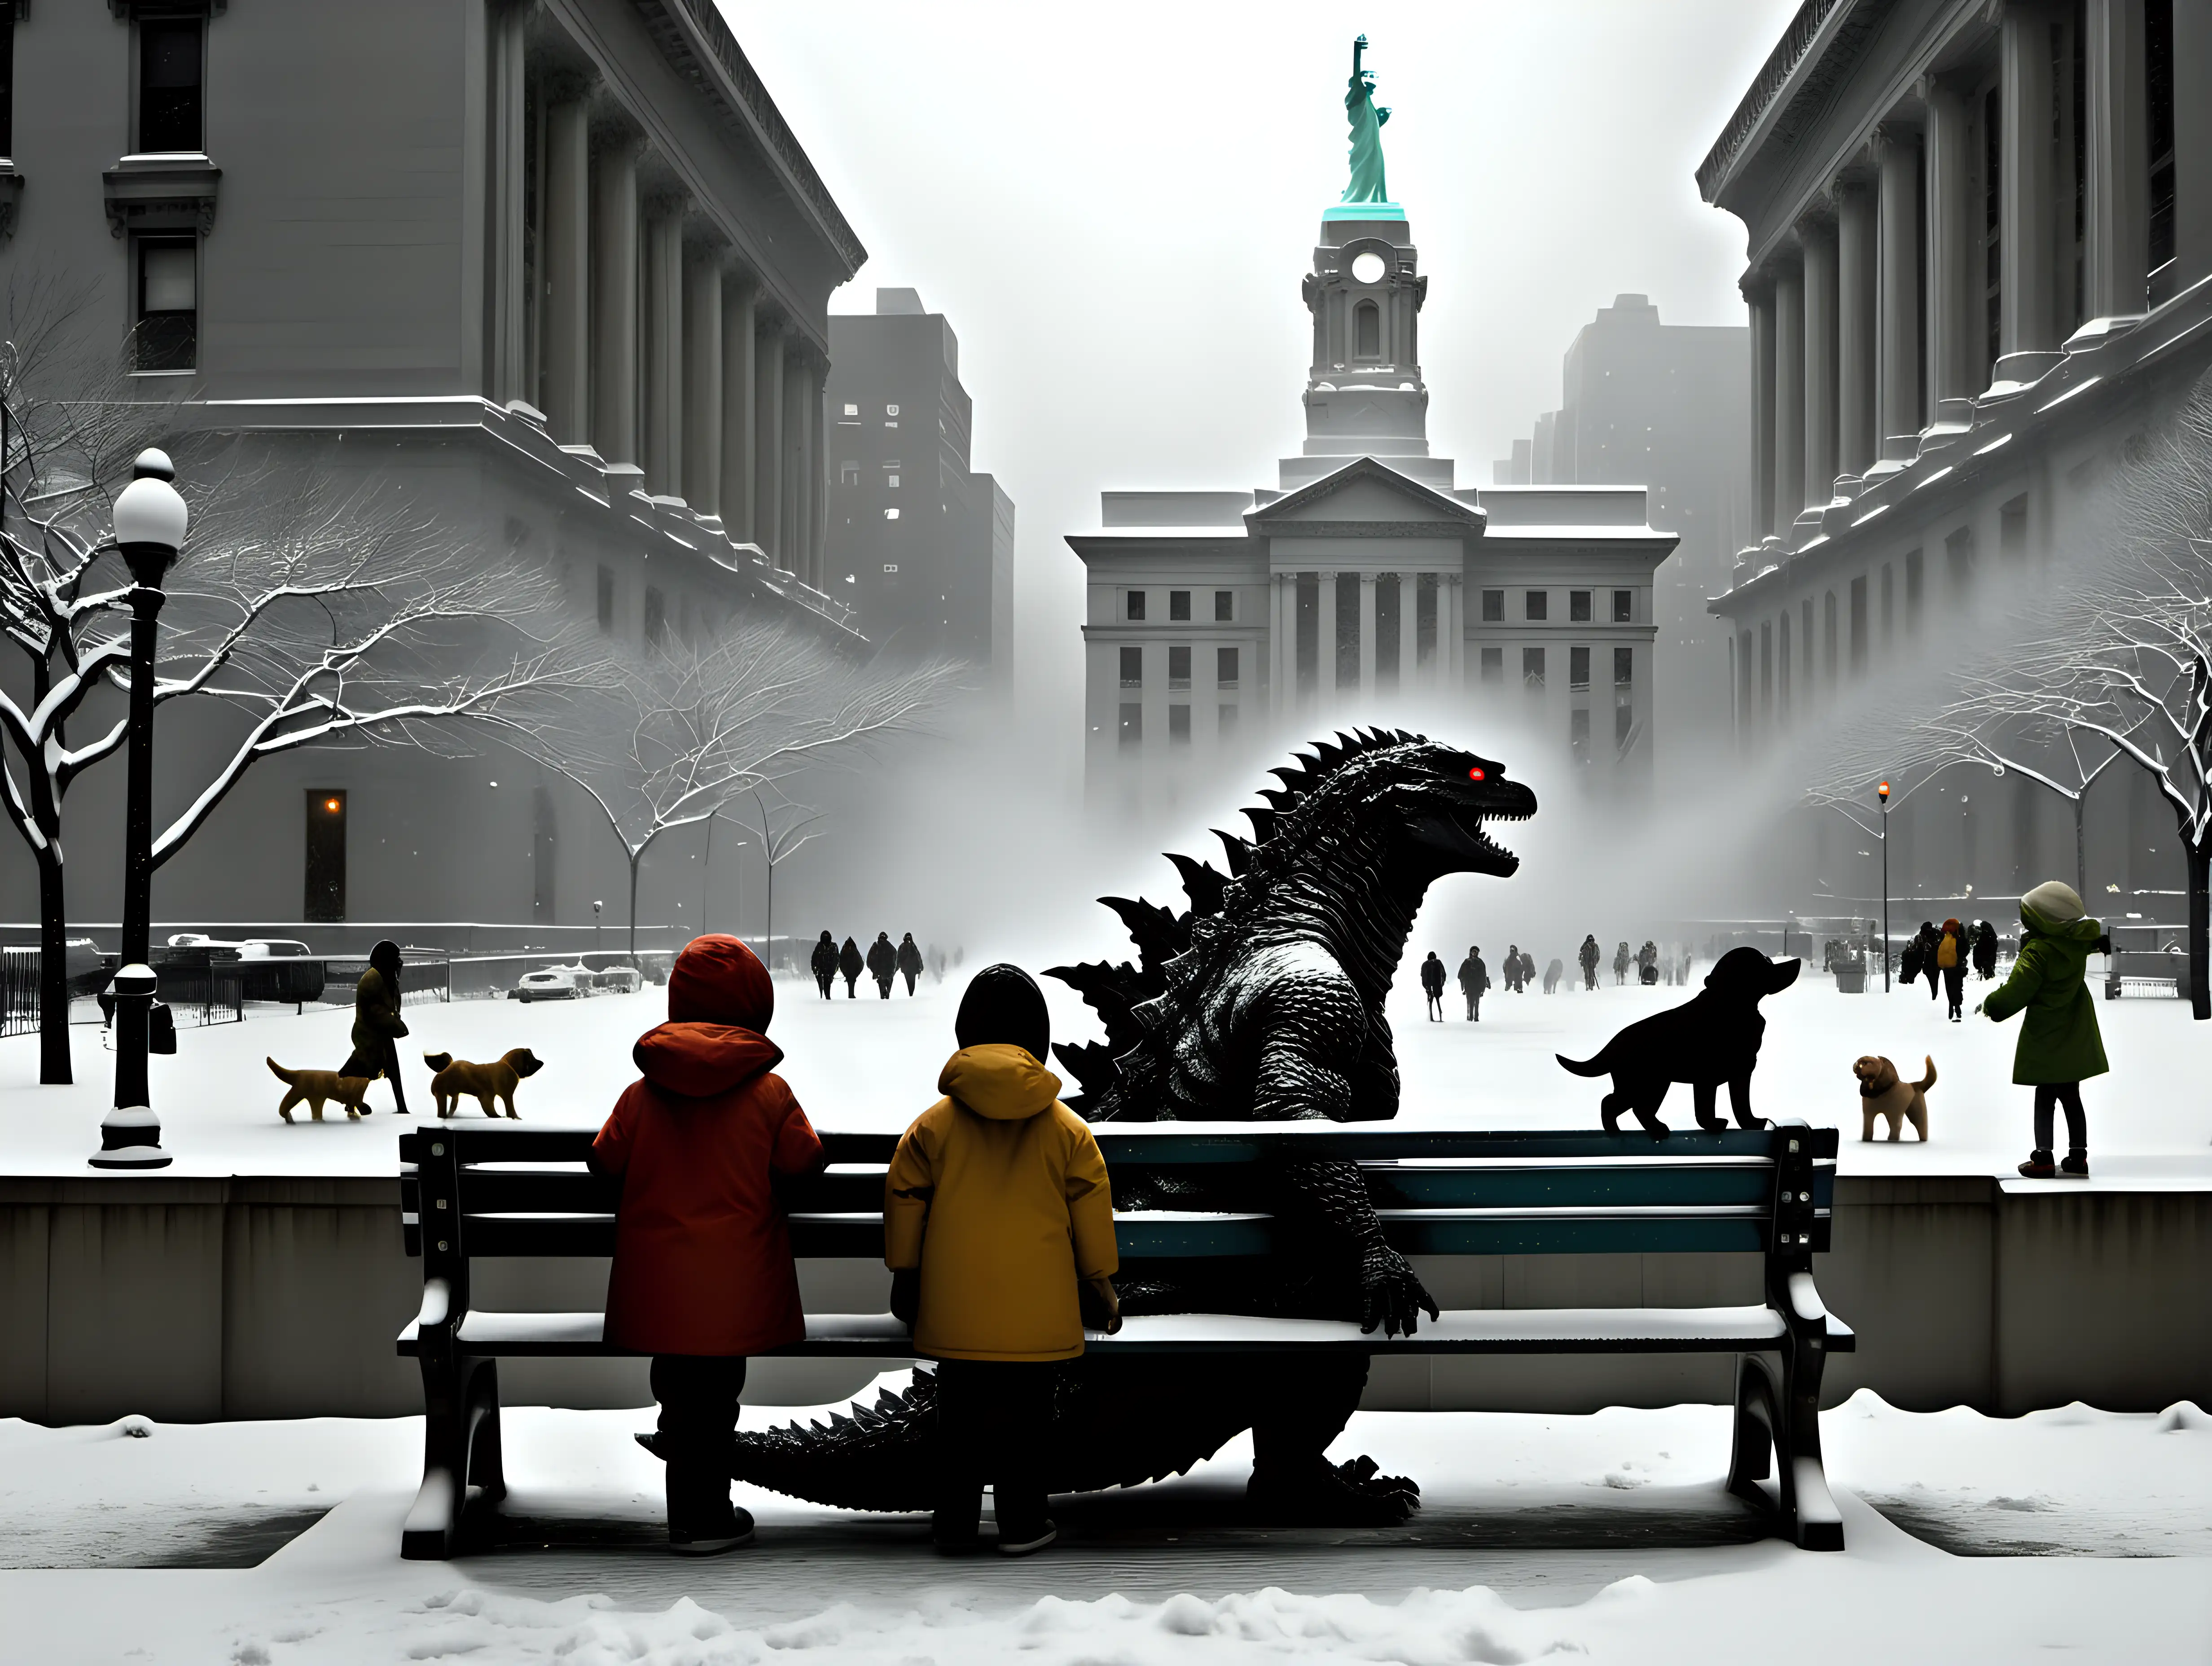 Godzilla Watching Children on Park Bench with Puppy in NYC Library Snowstorm